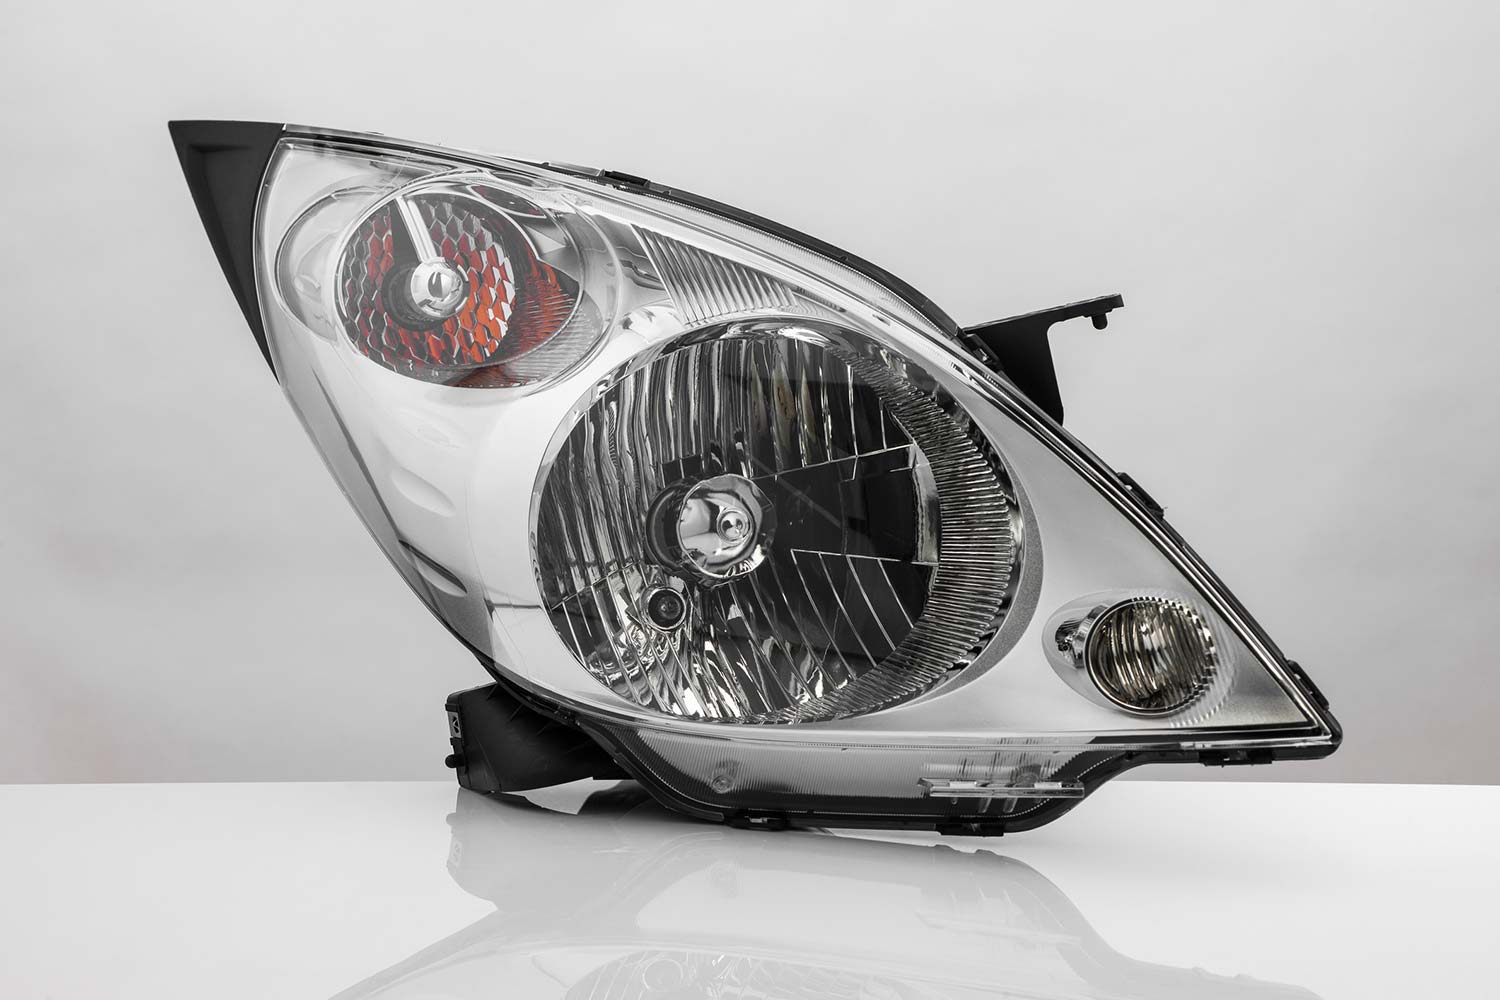 A picture of the headlight of the car